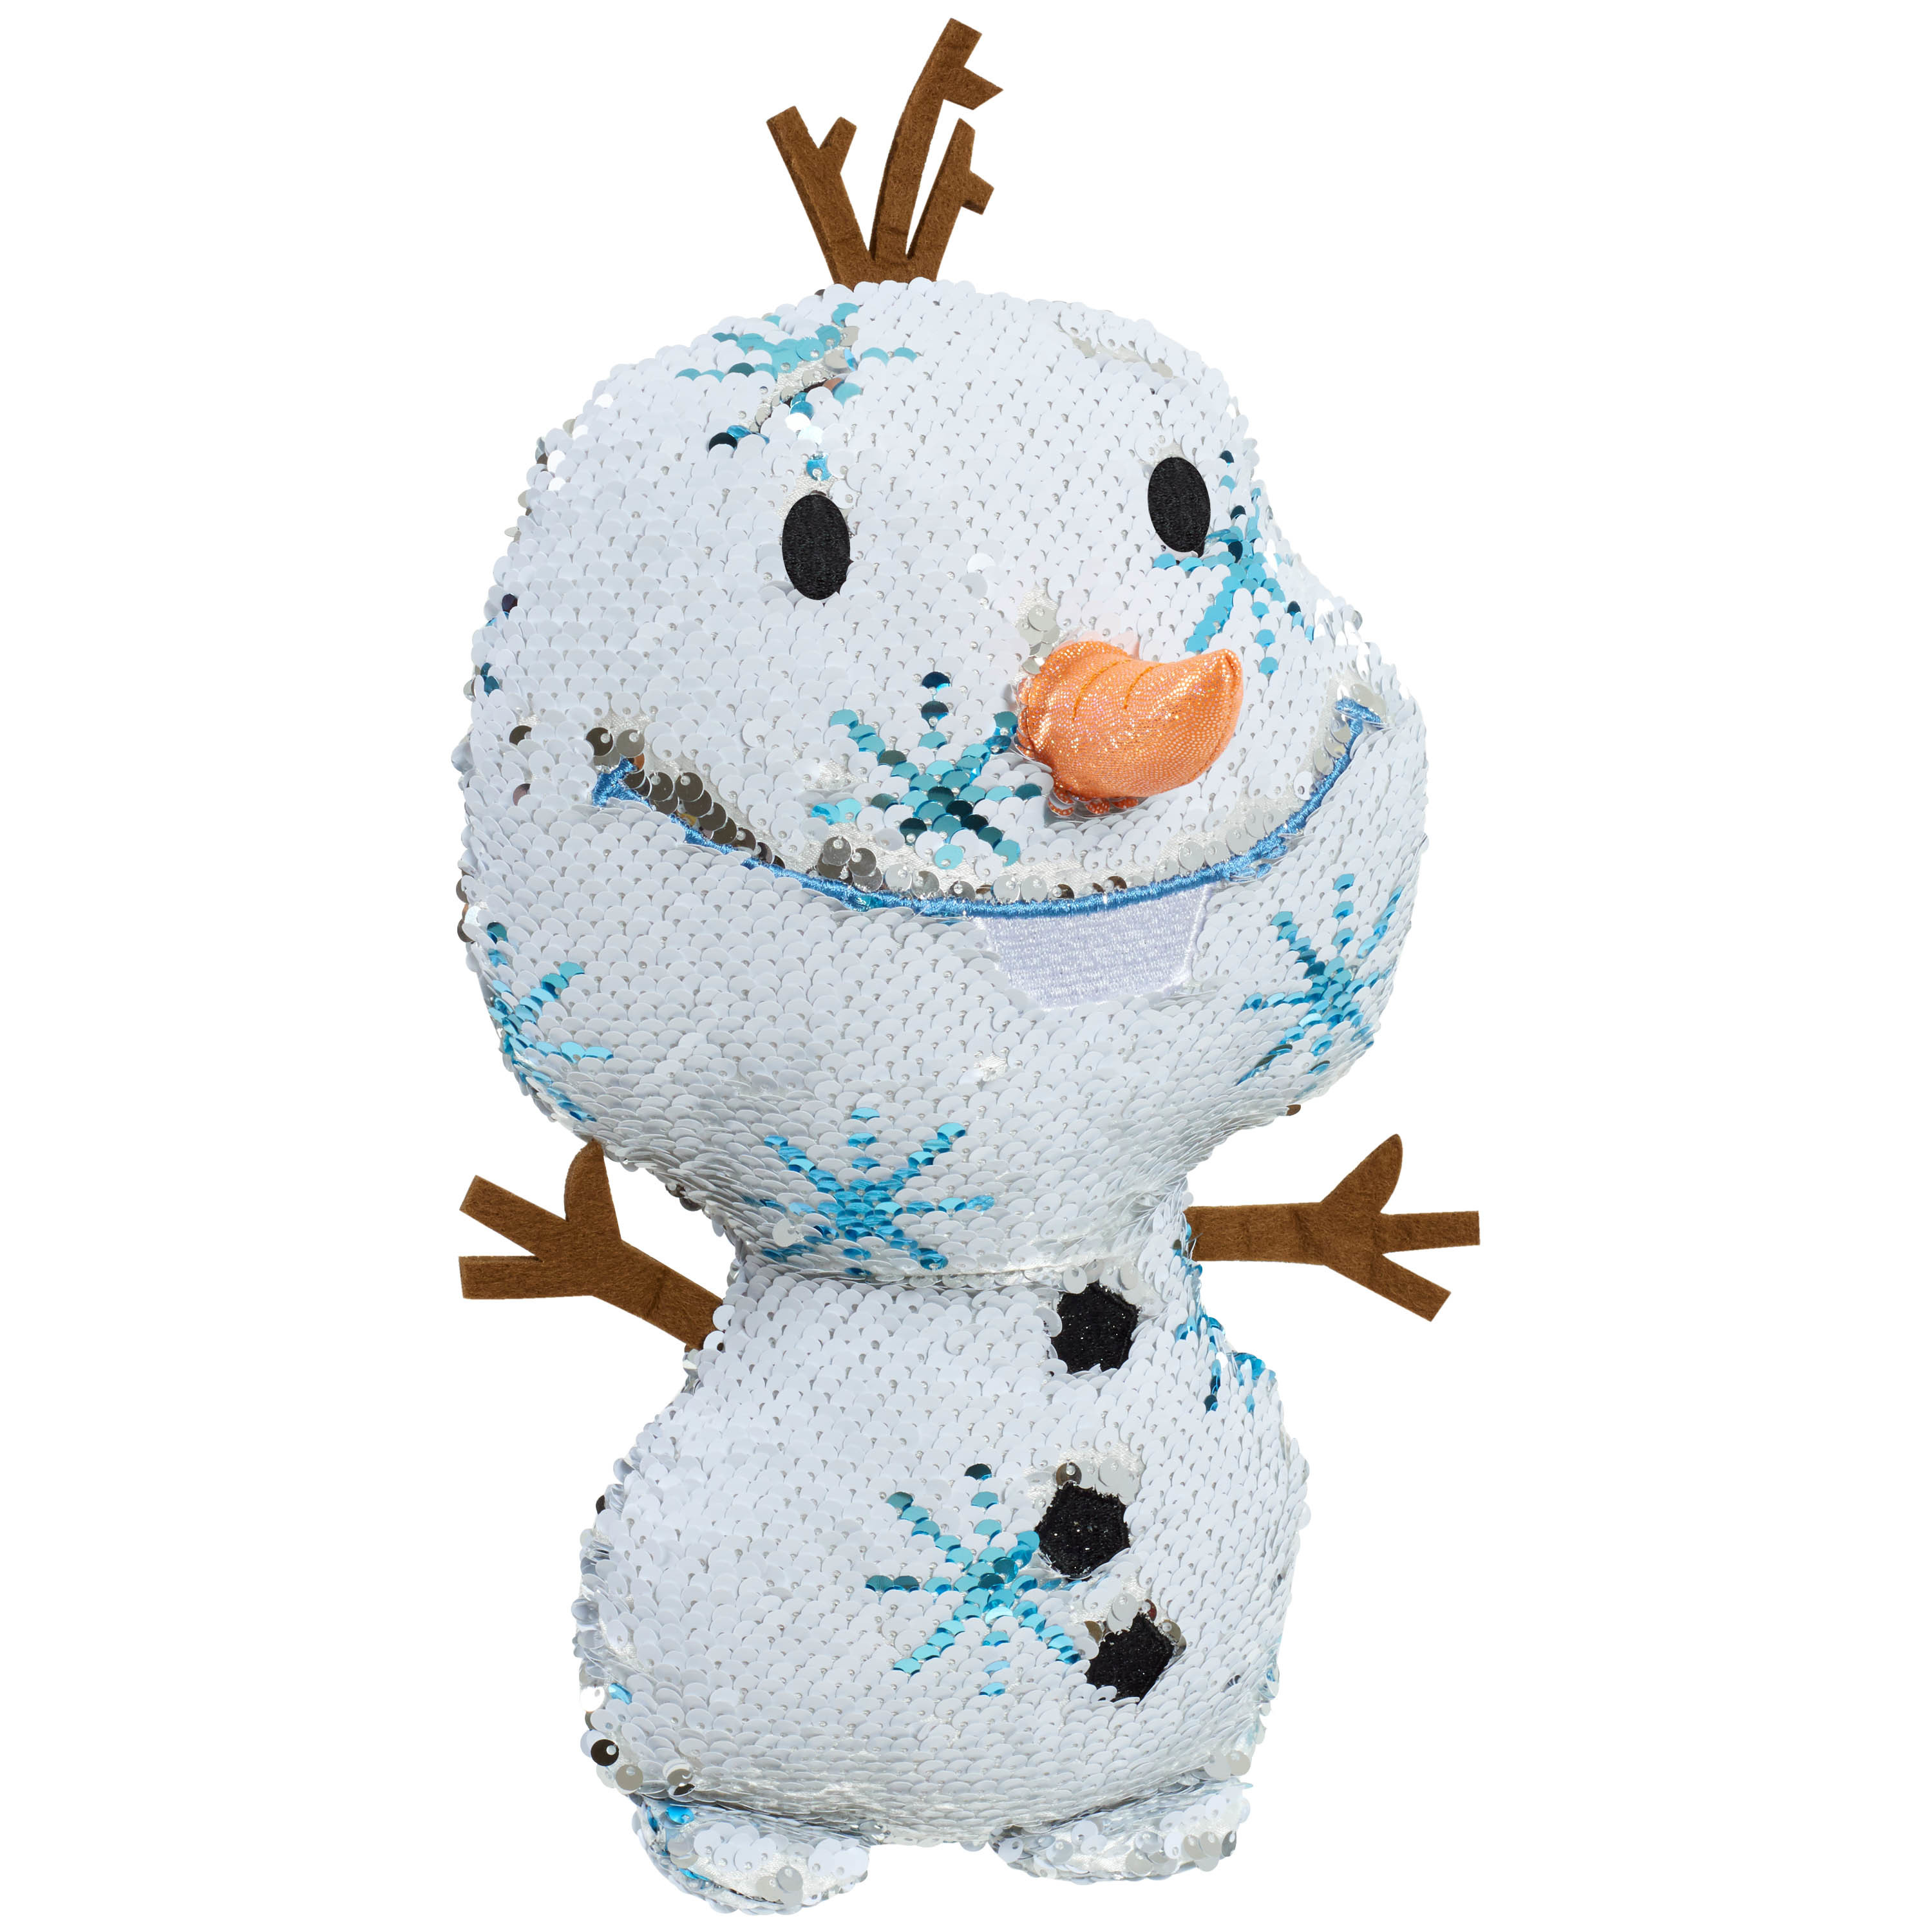 Disney Frozen 2 Reversible Sequins Large Plush Olaf, Officially Licensed Kids Toys for Ages 3 Up, Gifts and Presents - image 4 of 5